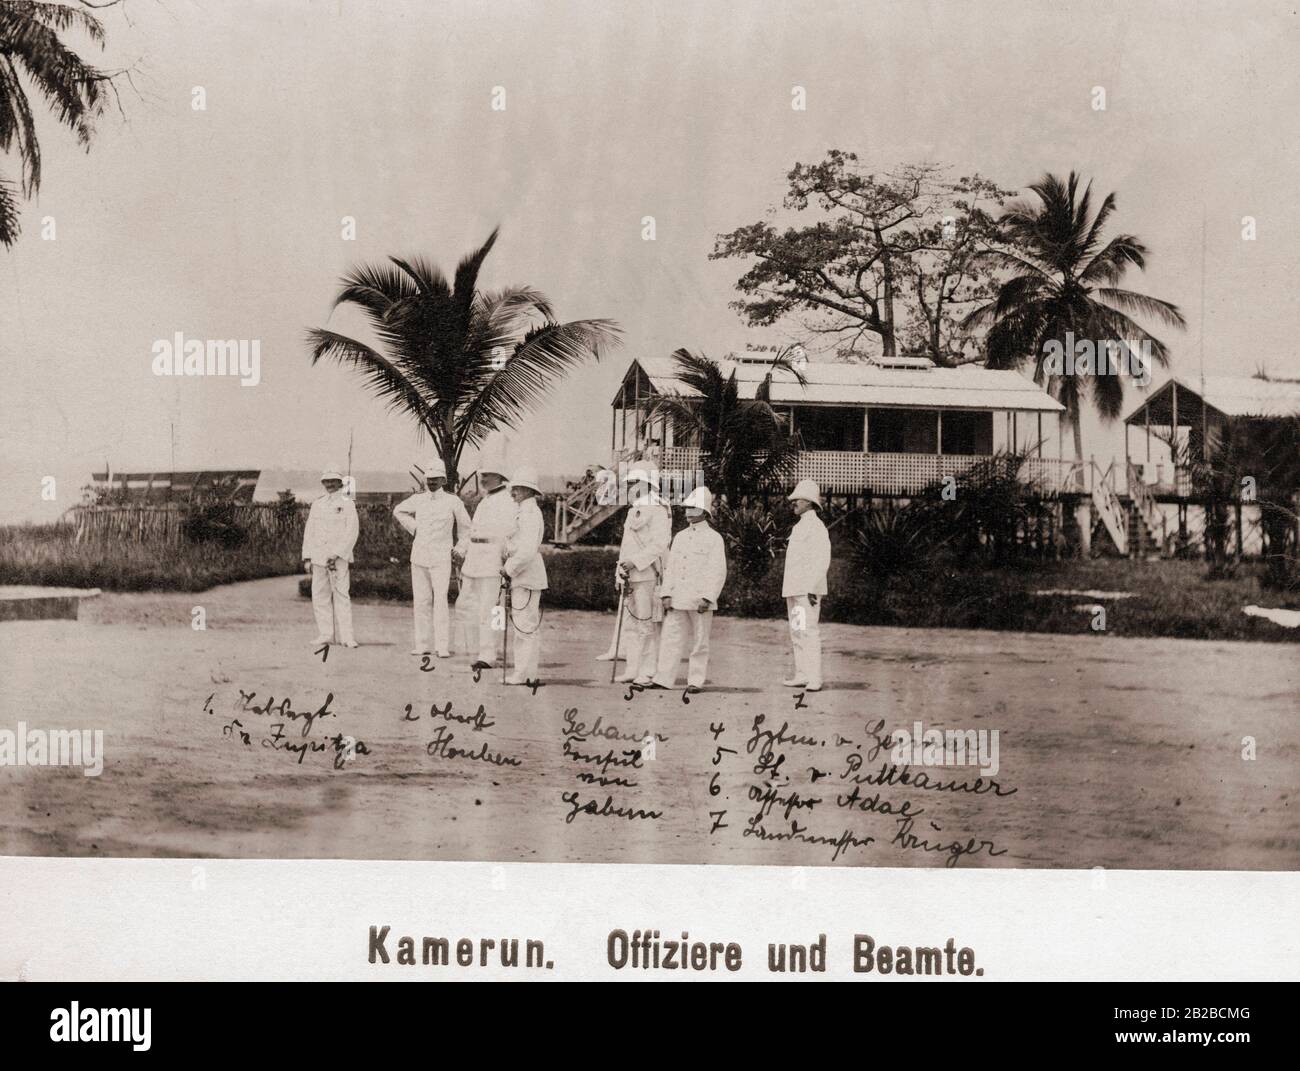 Illustration of German officers and officials in the German colony of Cameroon. Stock Photo